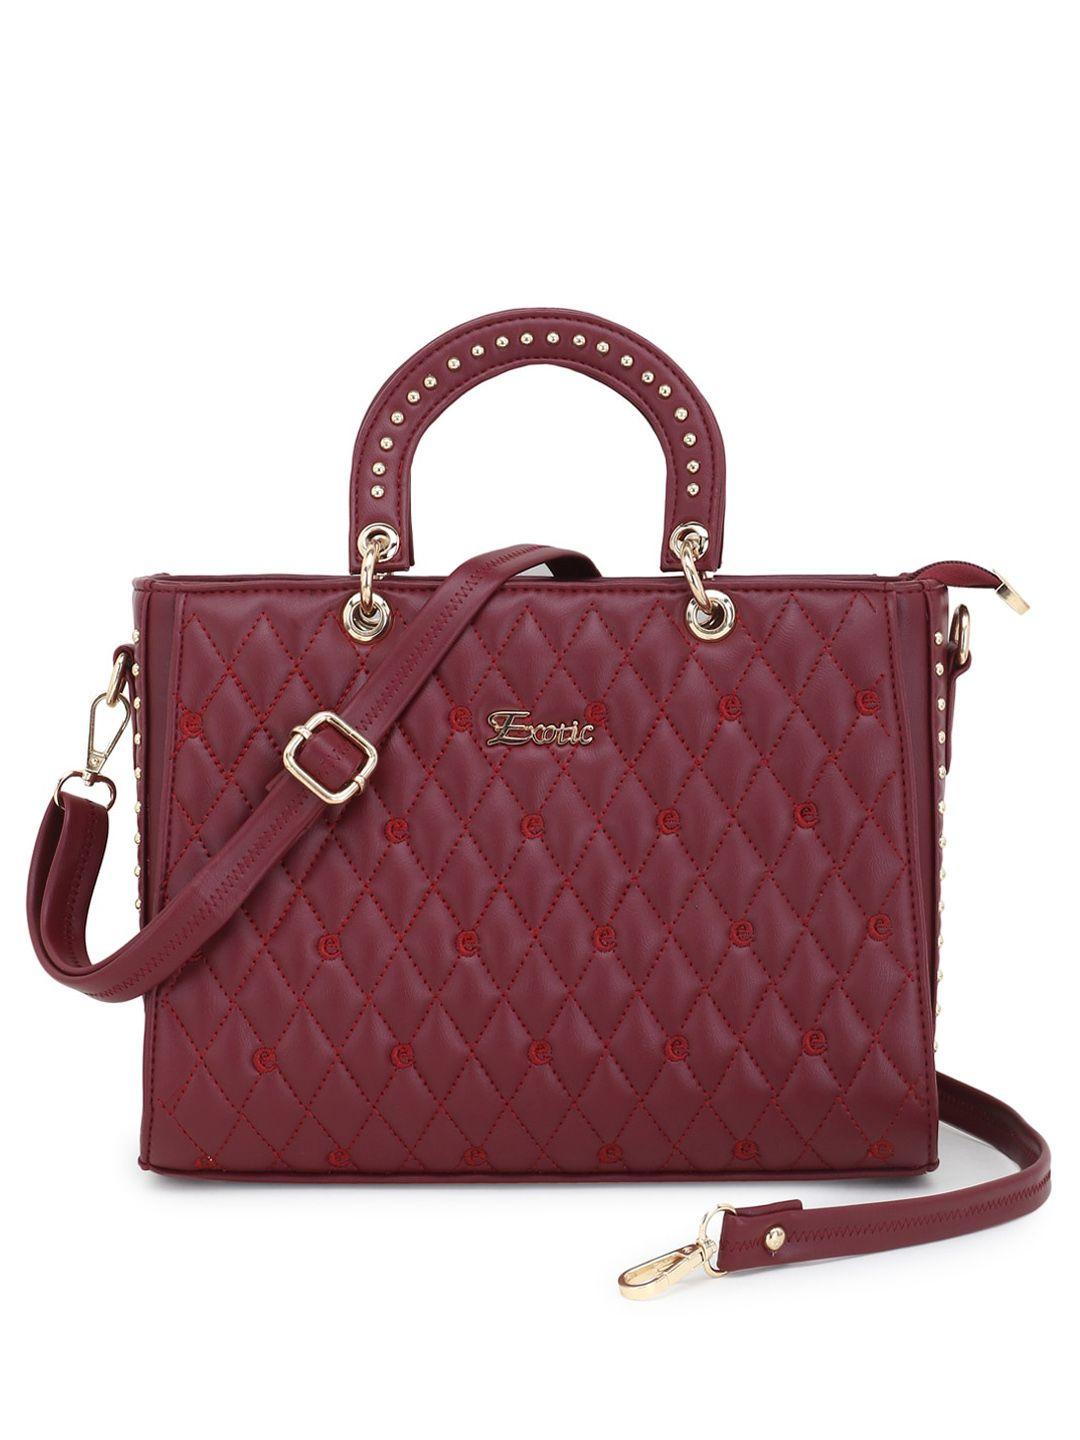 exotic maroon pu shopper handheld bag with quilted